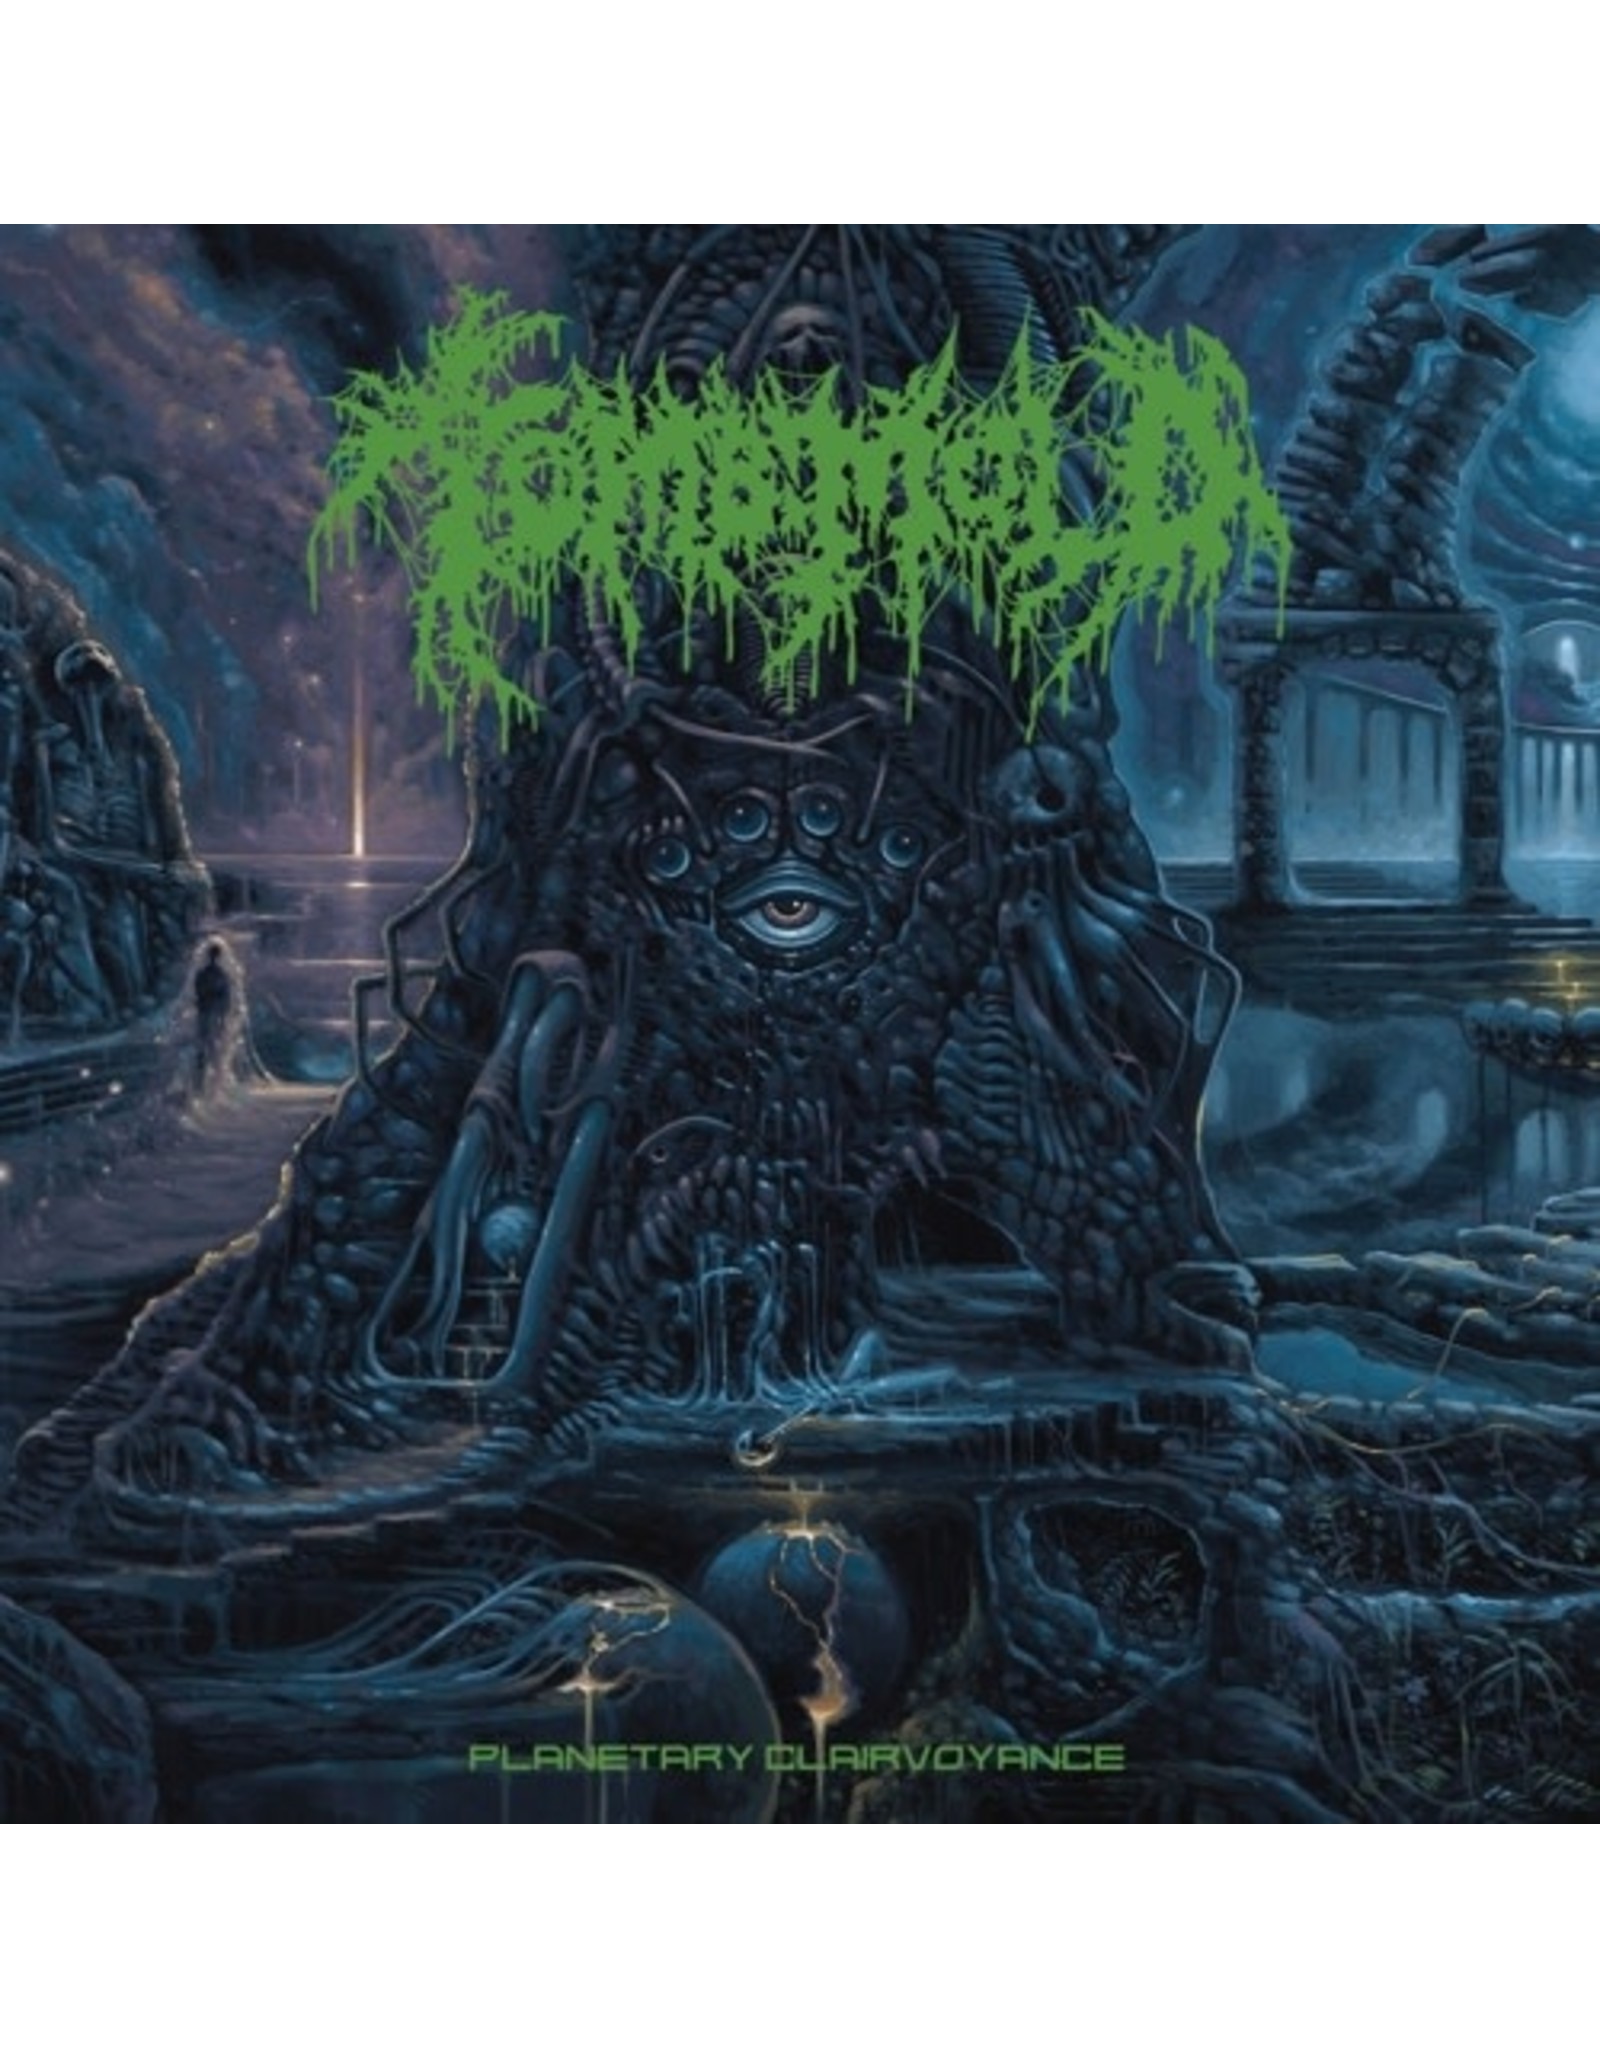 20 Buck Spin Tomb Mold: Planetary Clarvoyance (Coloured) LP